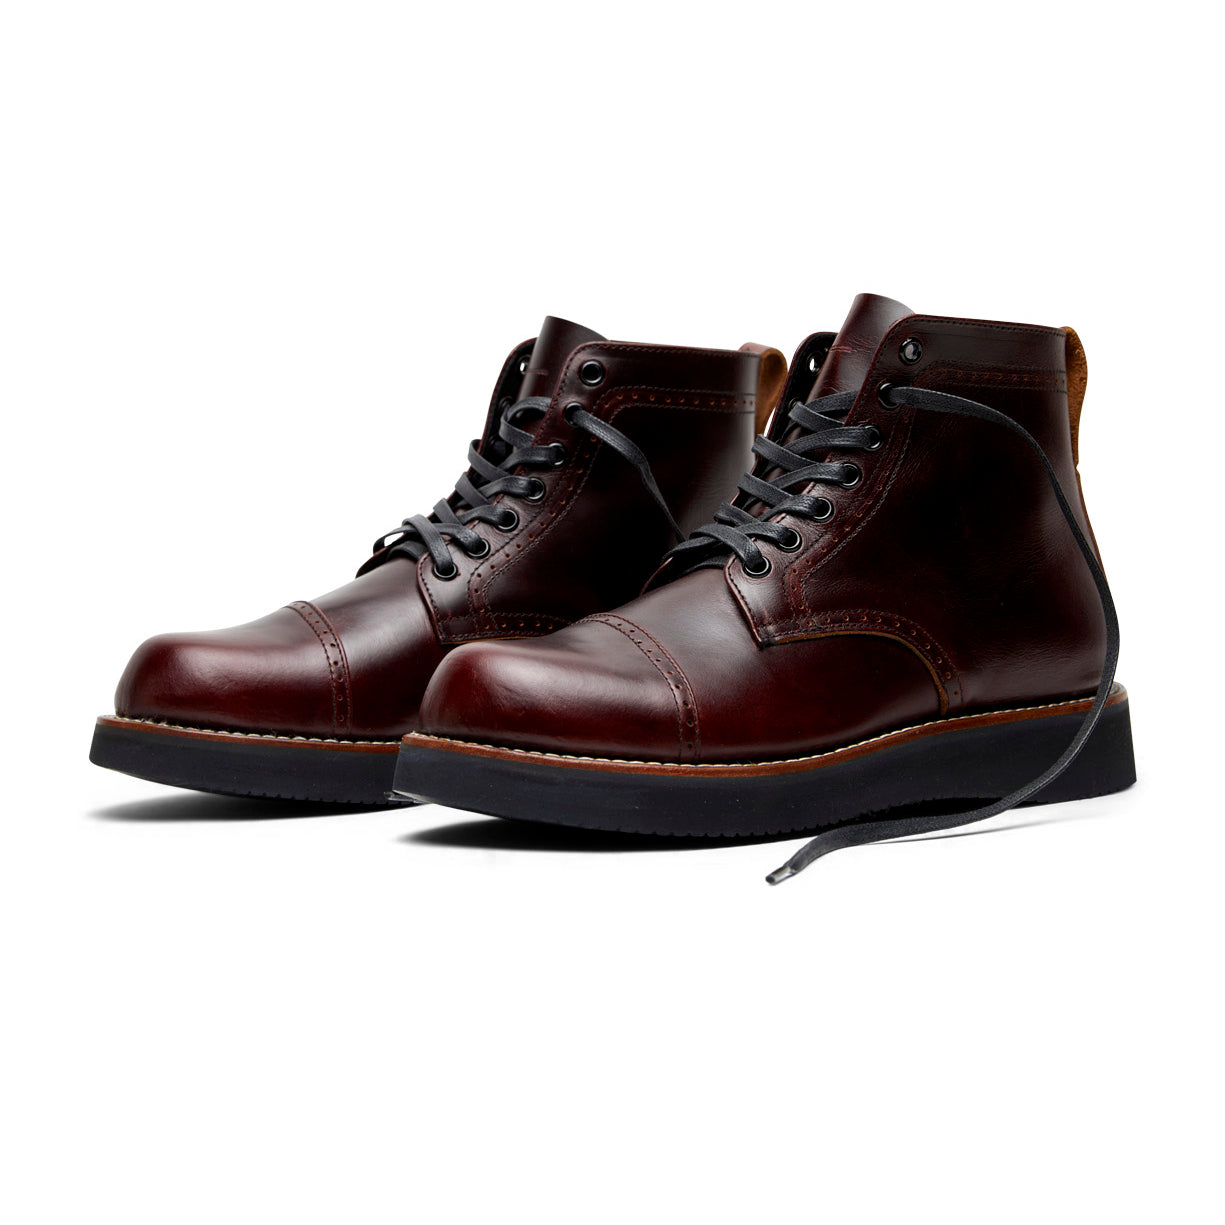 A pair of Aaron men's brown cap toe silhouette boots from the Broken Homme collection, showcased on a white background.